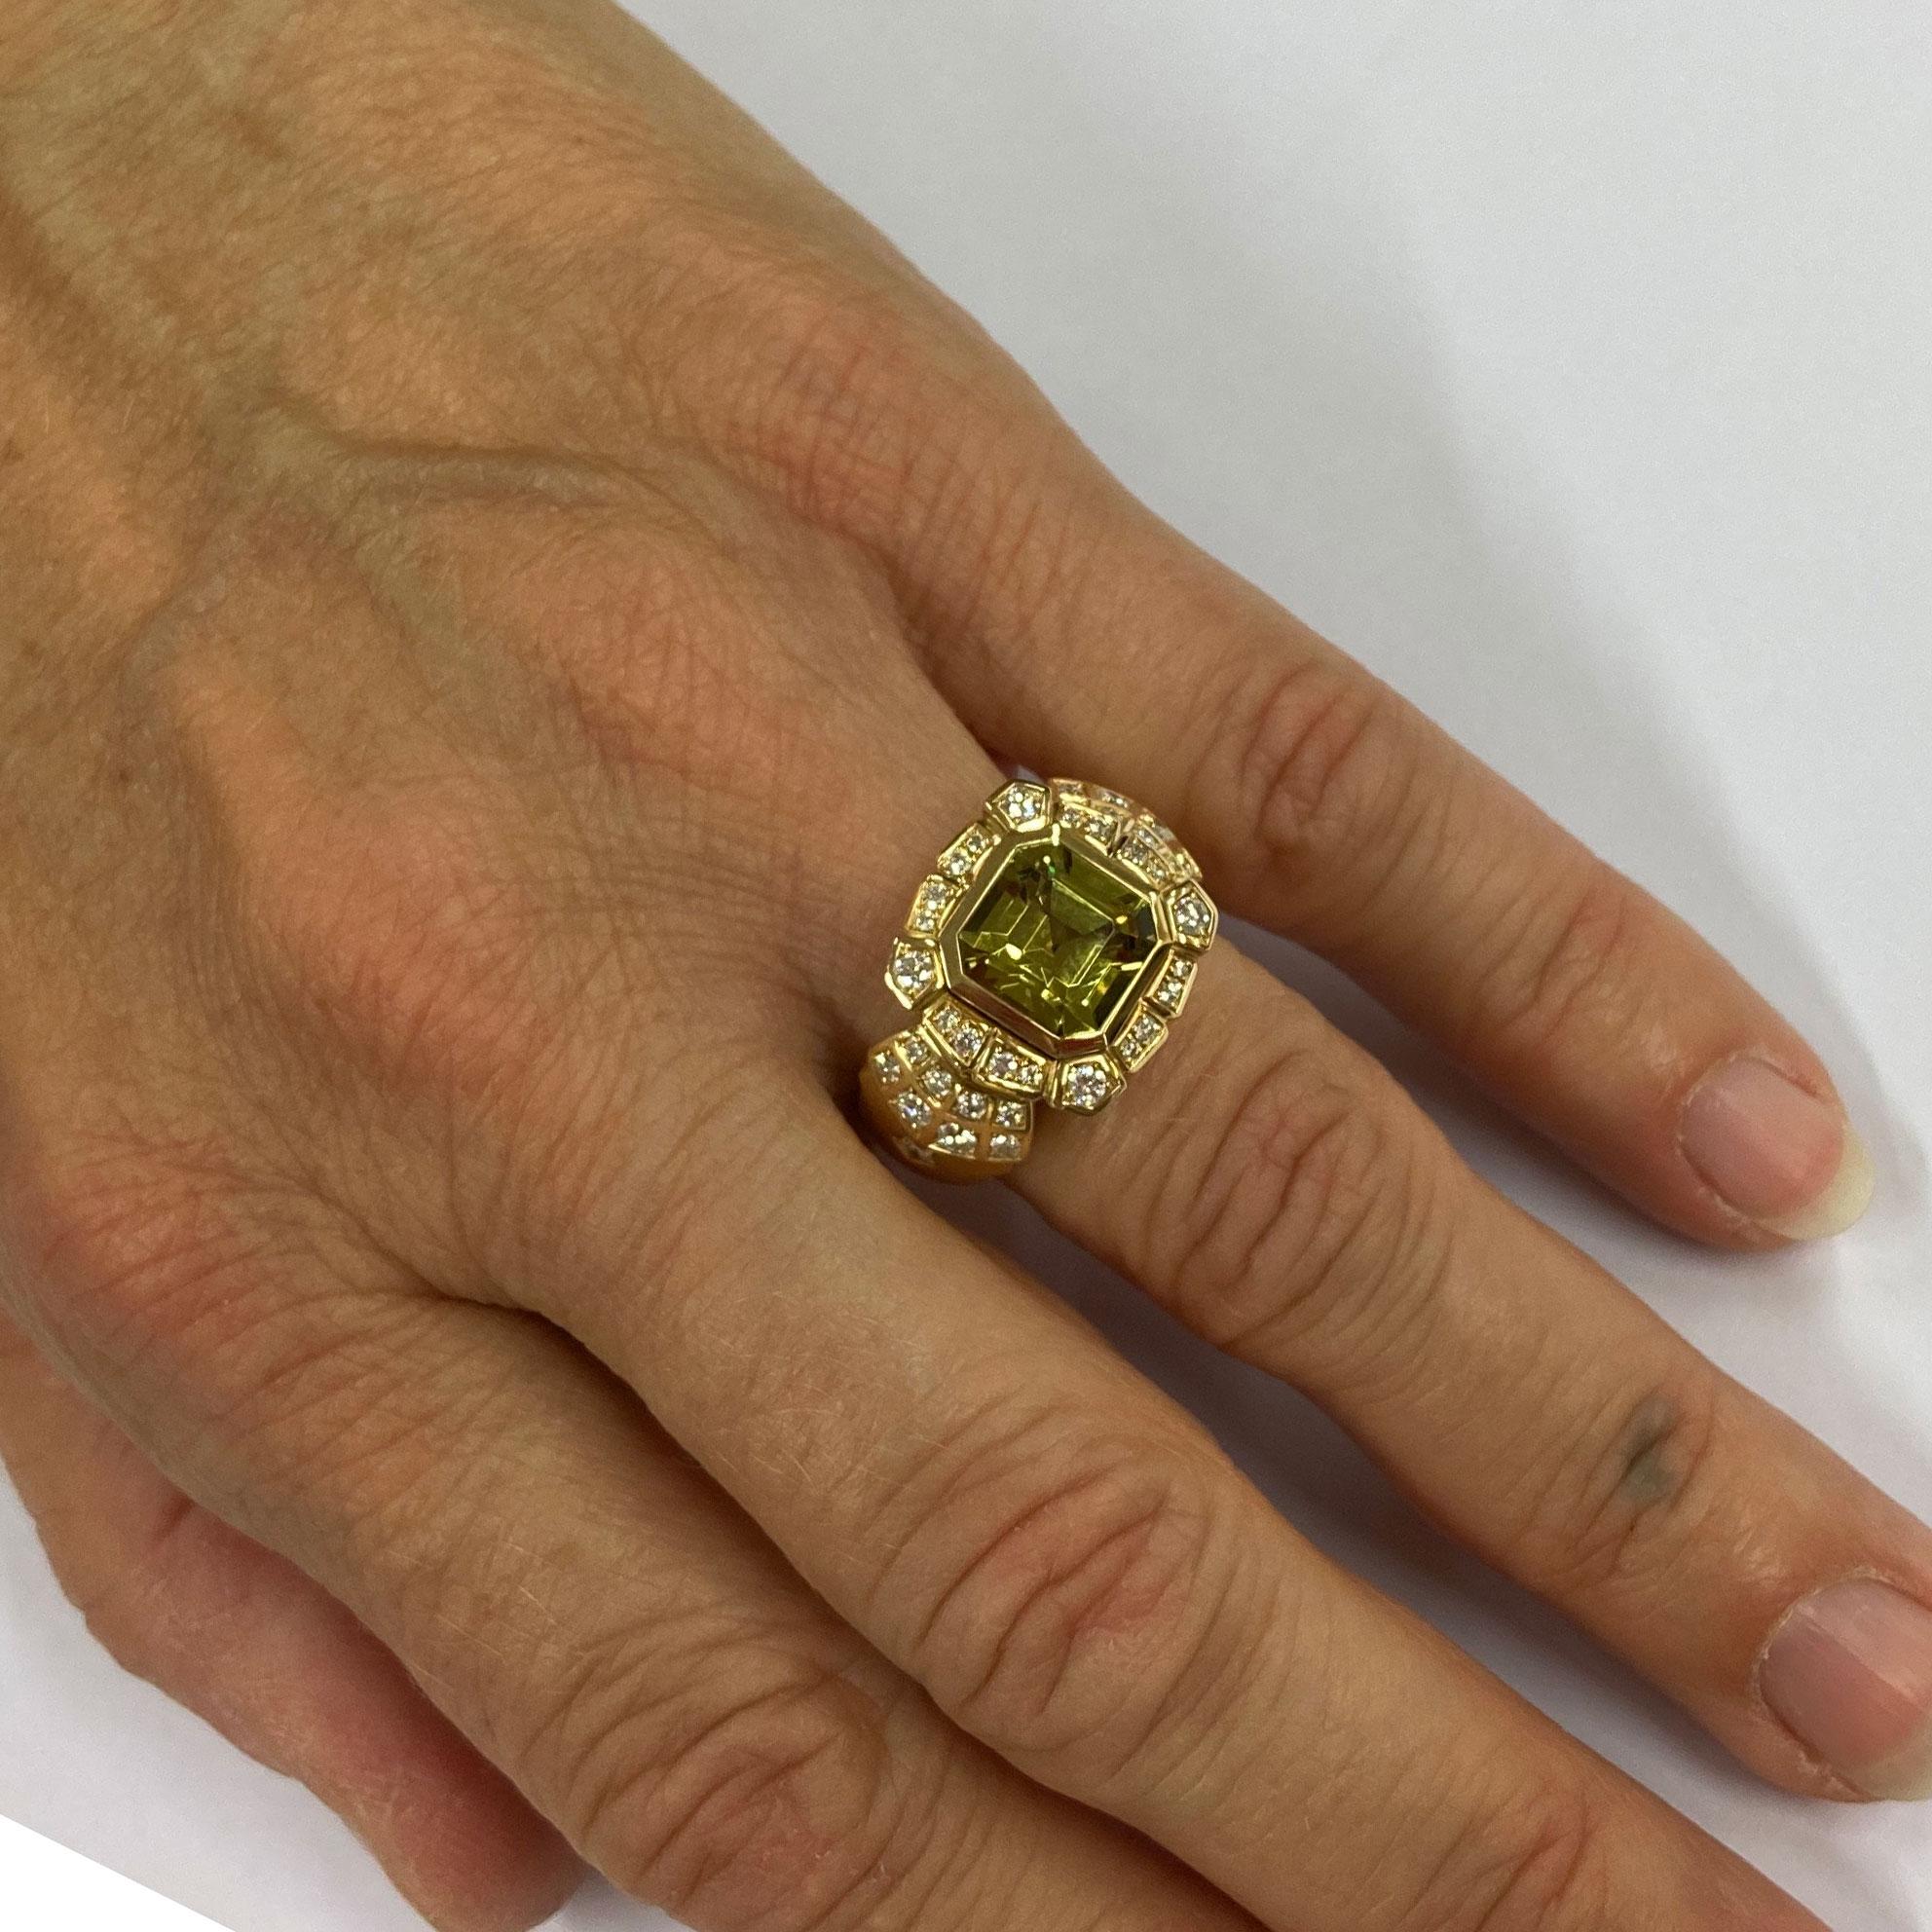 This Cocktail Ring in Rose Gold 18 kt with a slightly lifted center part shows a bezel-set , Asscher cut, green Garnet ( Andradite) with a total weight of 4.24 ct. The intriguing green color of the gem is highlighted by an intersected and